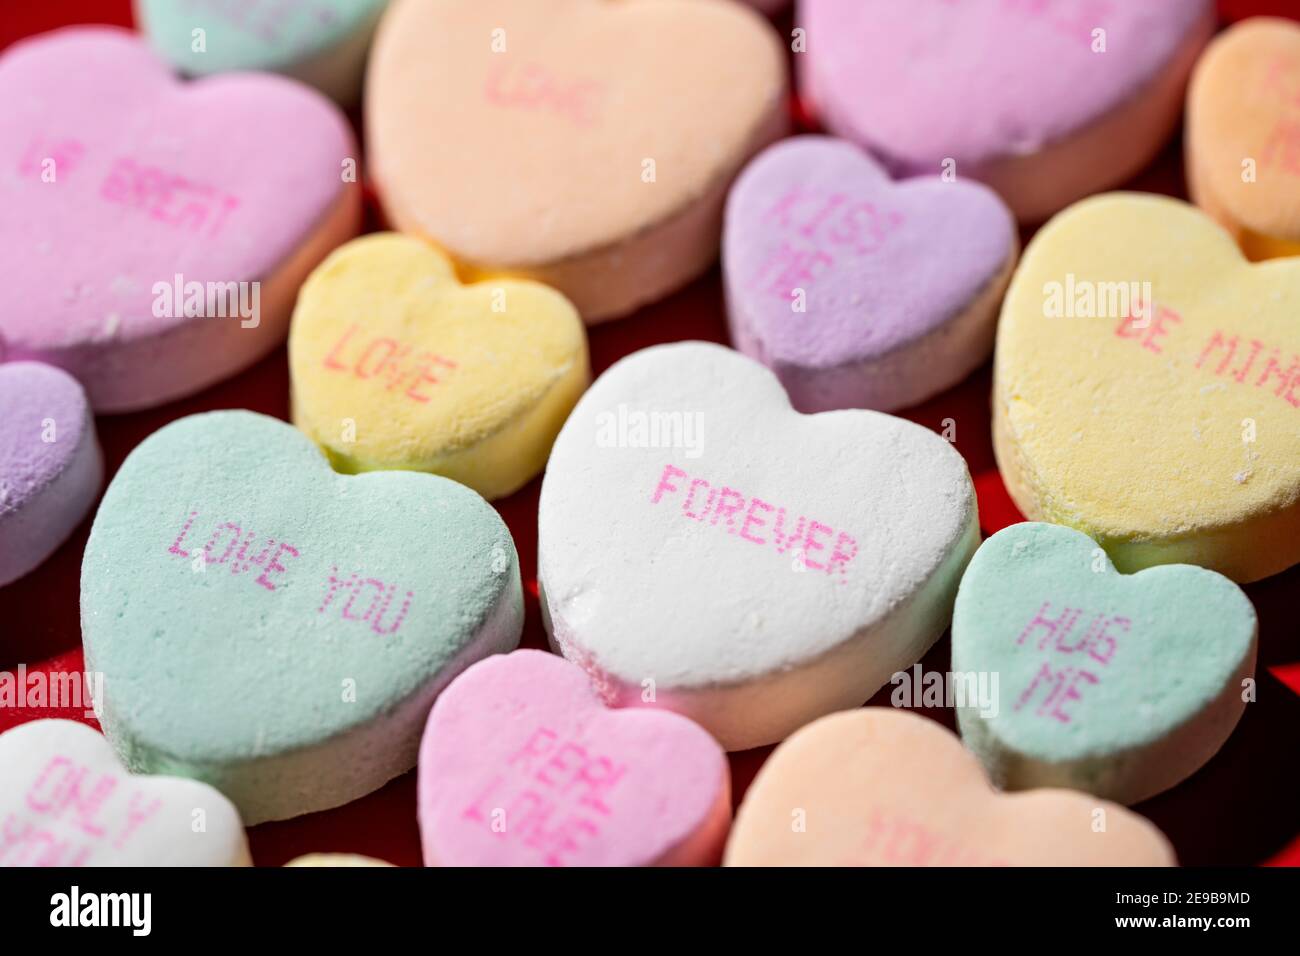 Rows of colorful conversation candy hearts lined up in rows on a red surface. Stock Photo